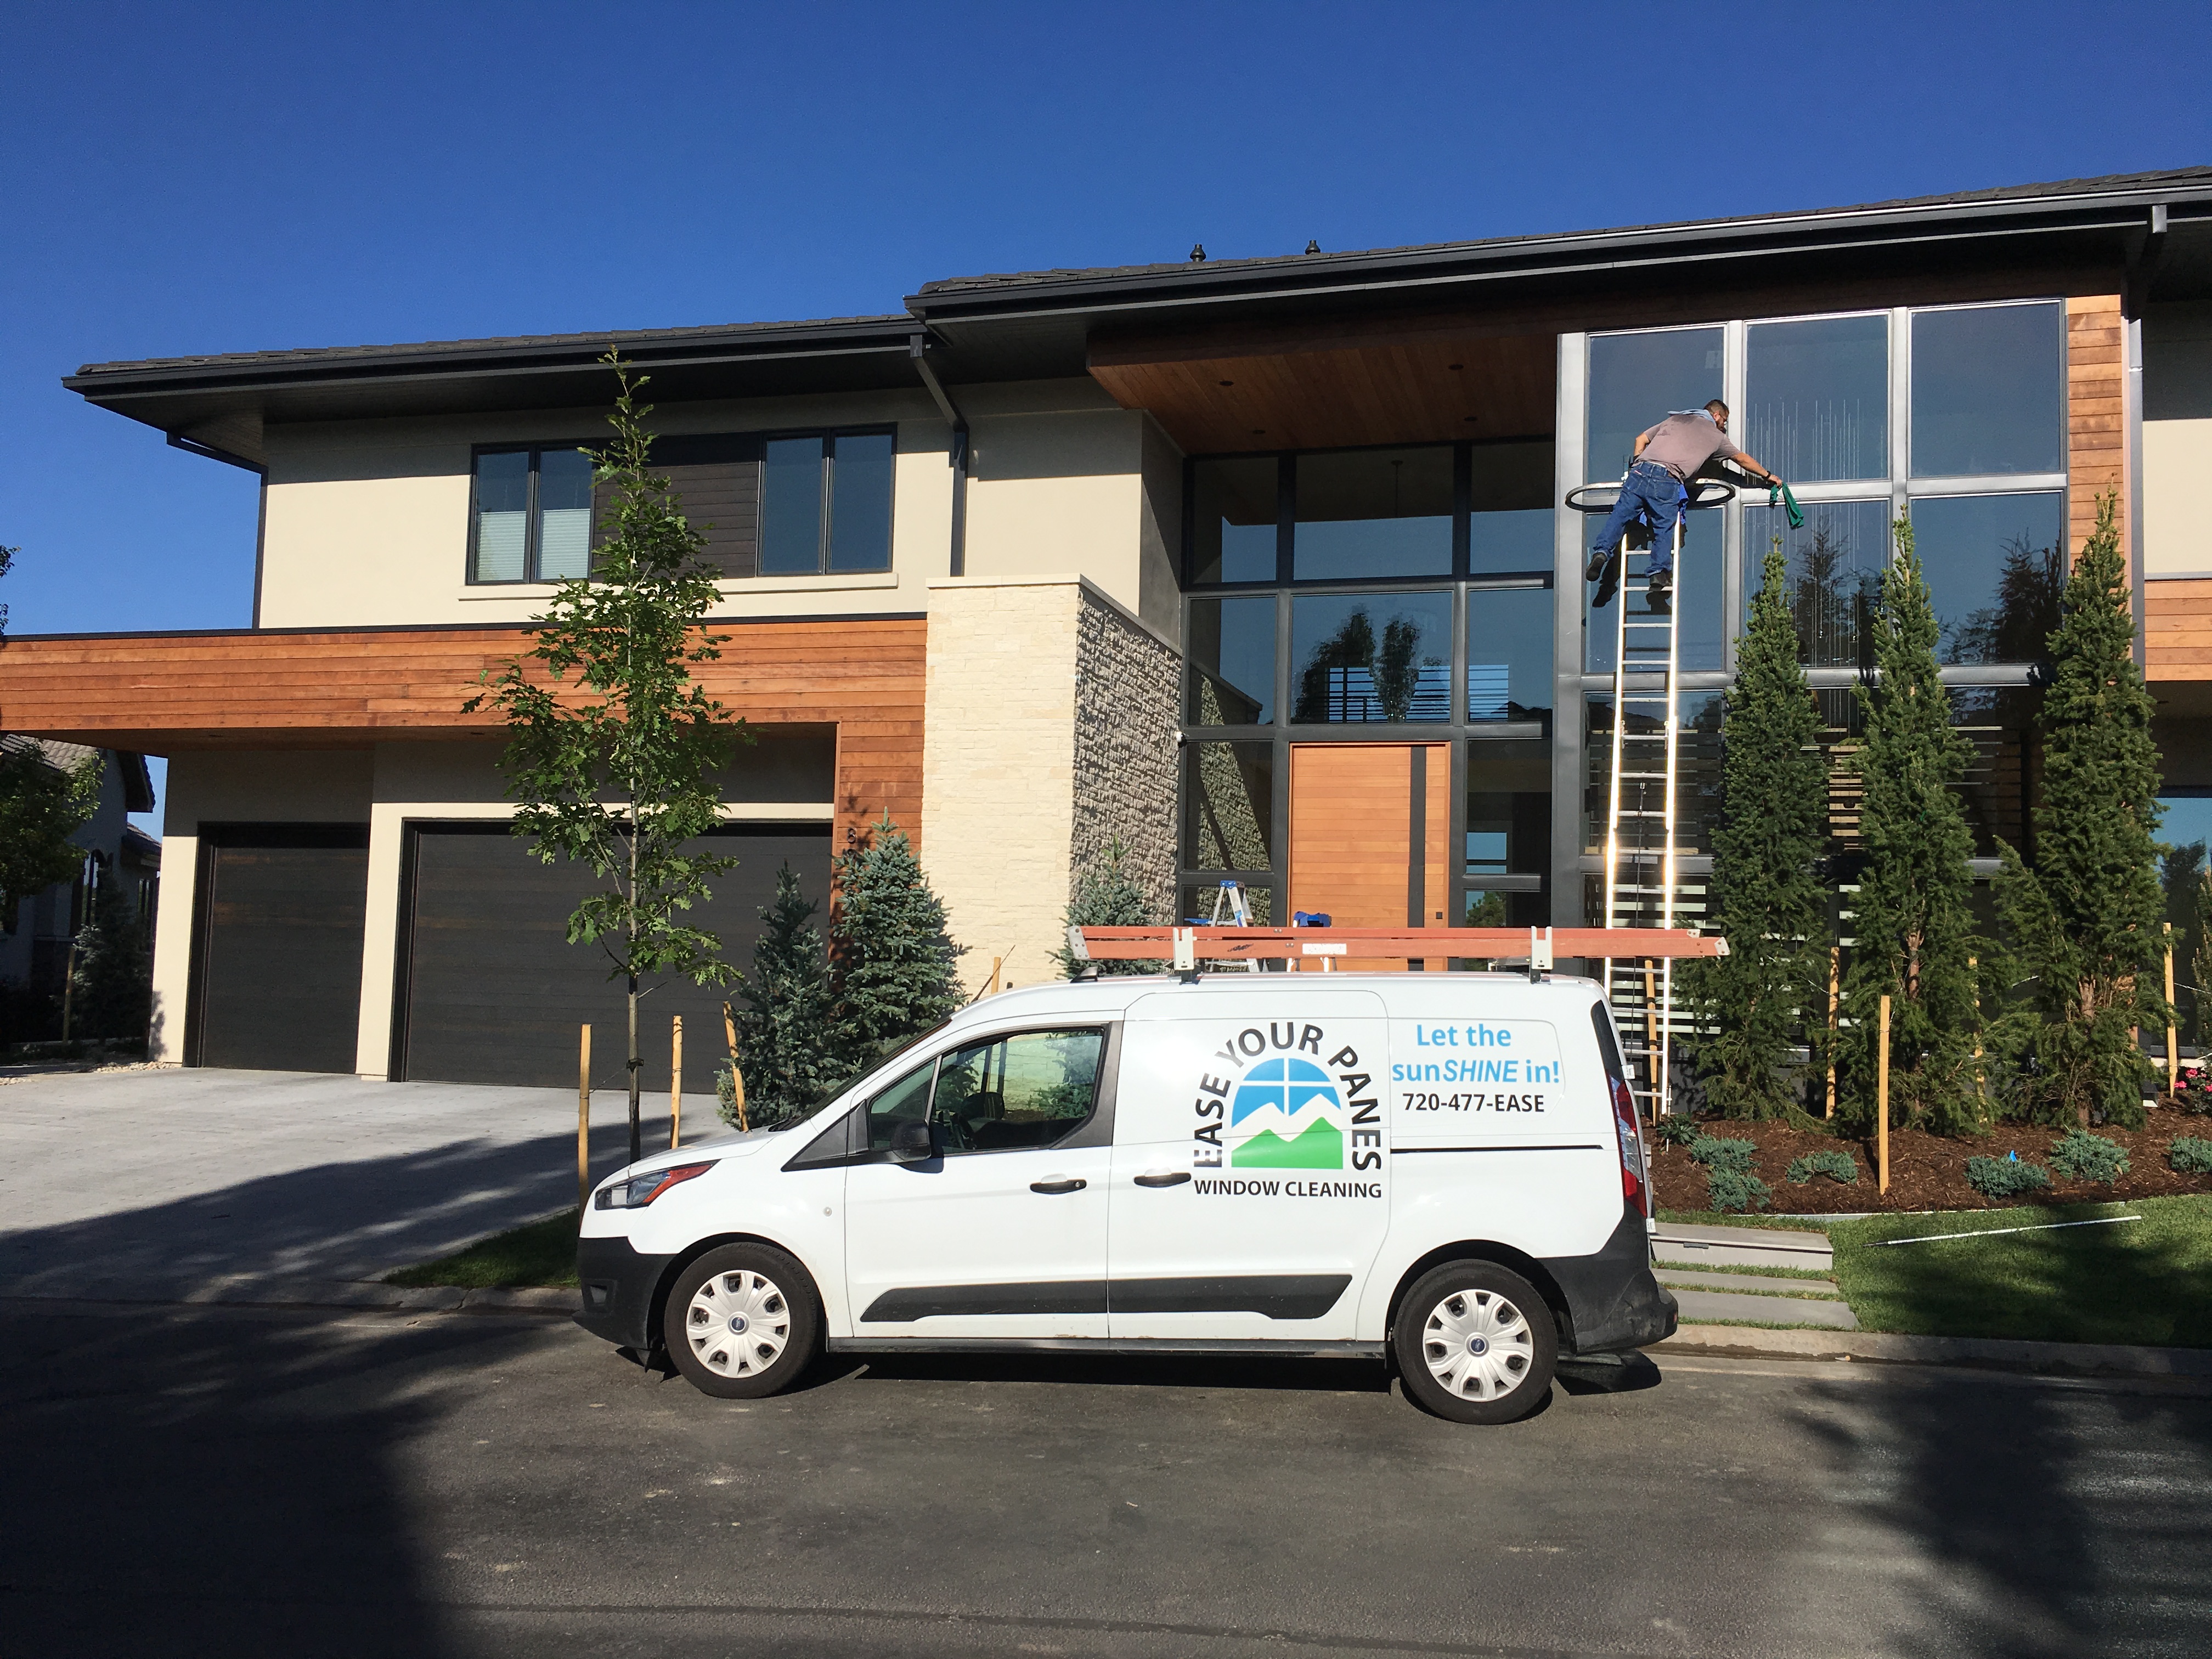 Denver’s Trusted Window Cleaning Professionals - BY

|
|
|

[———
== 2
an \ .
, .
a sa [3 3
bo E
Lod : p
}
6 LS
ZB
mel Lm a oF 5 \
NS x Ly I
ala y
hy § “o
Ya NK J =
, »
- /
3 fa v

OUR

7 % 720-477-EASE
< <

m
pa wn
a» "9%, \DOW CLEANING

Sap.